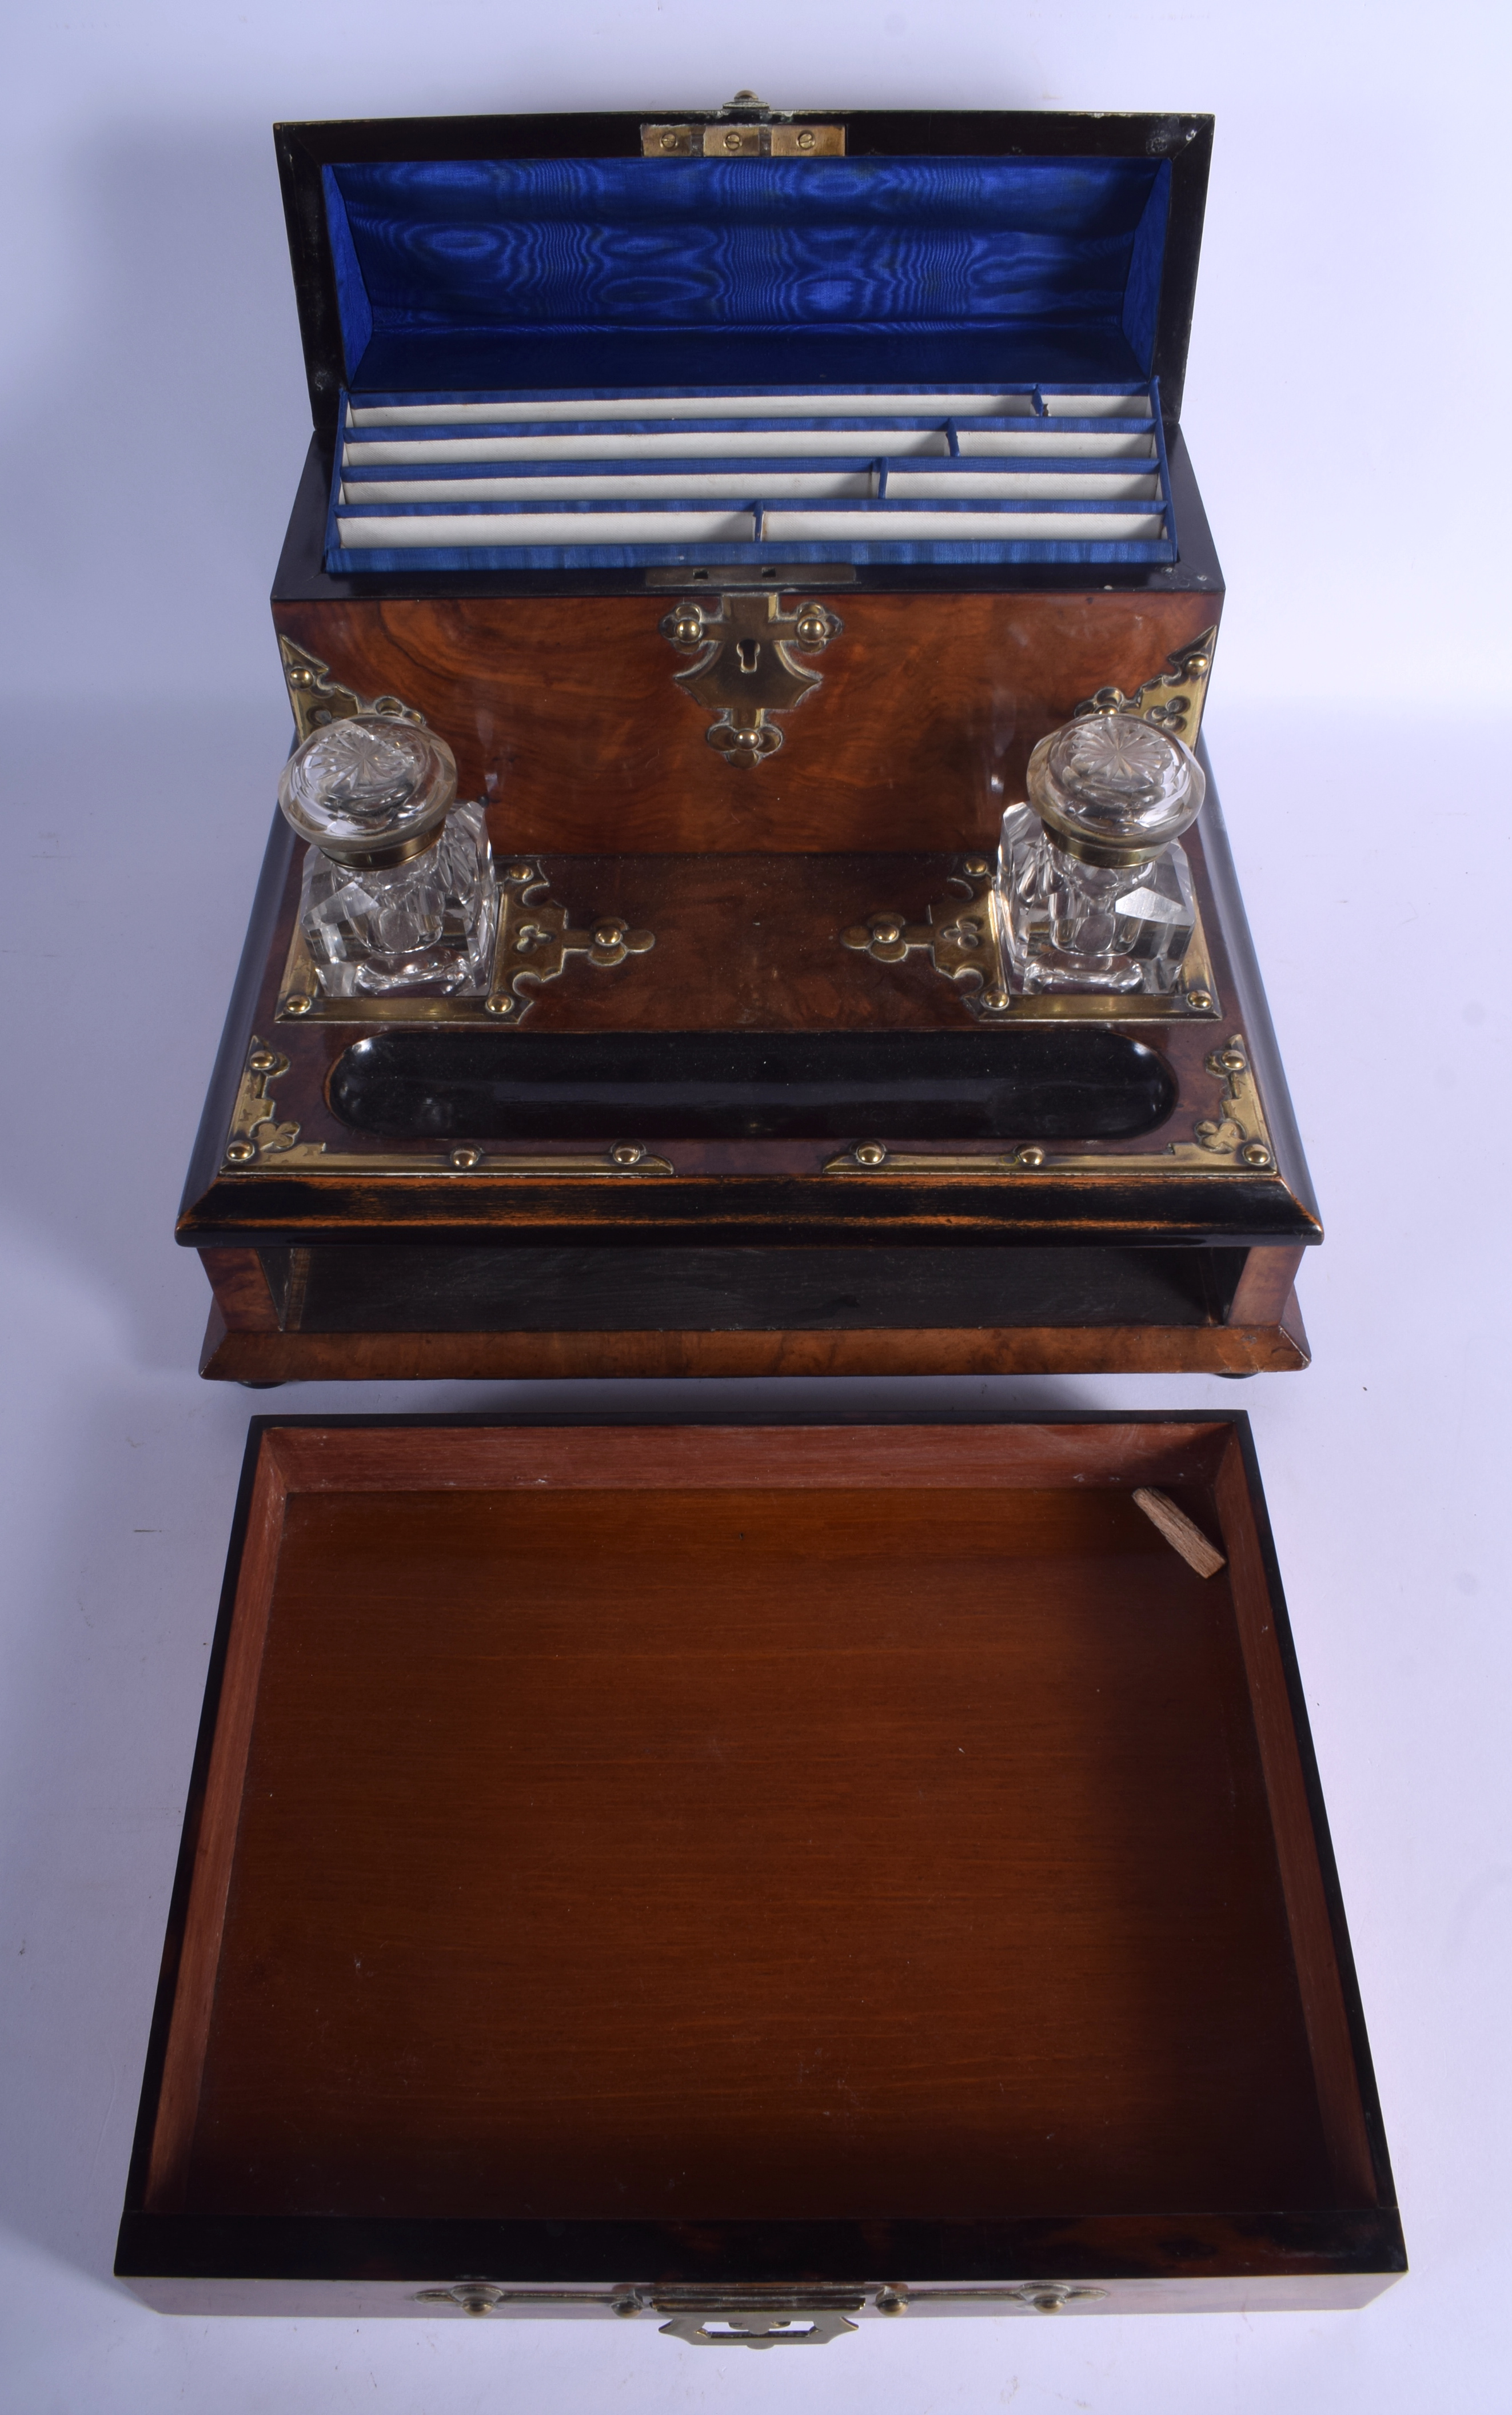 A LATE VICTORIAN BURR WALNUT BRASS BOUND INKWELL in the Gothic revival manner. 33 cm x 31 cm. - Image 3 of 3